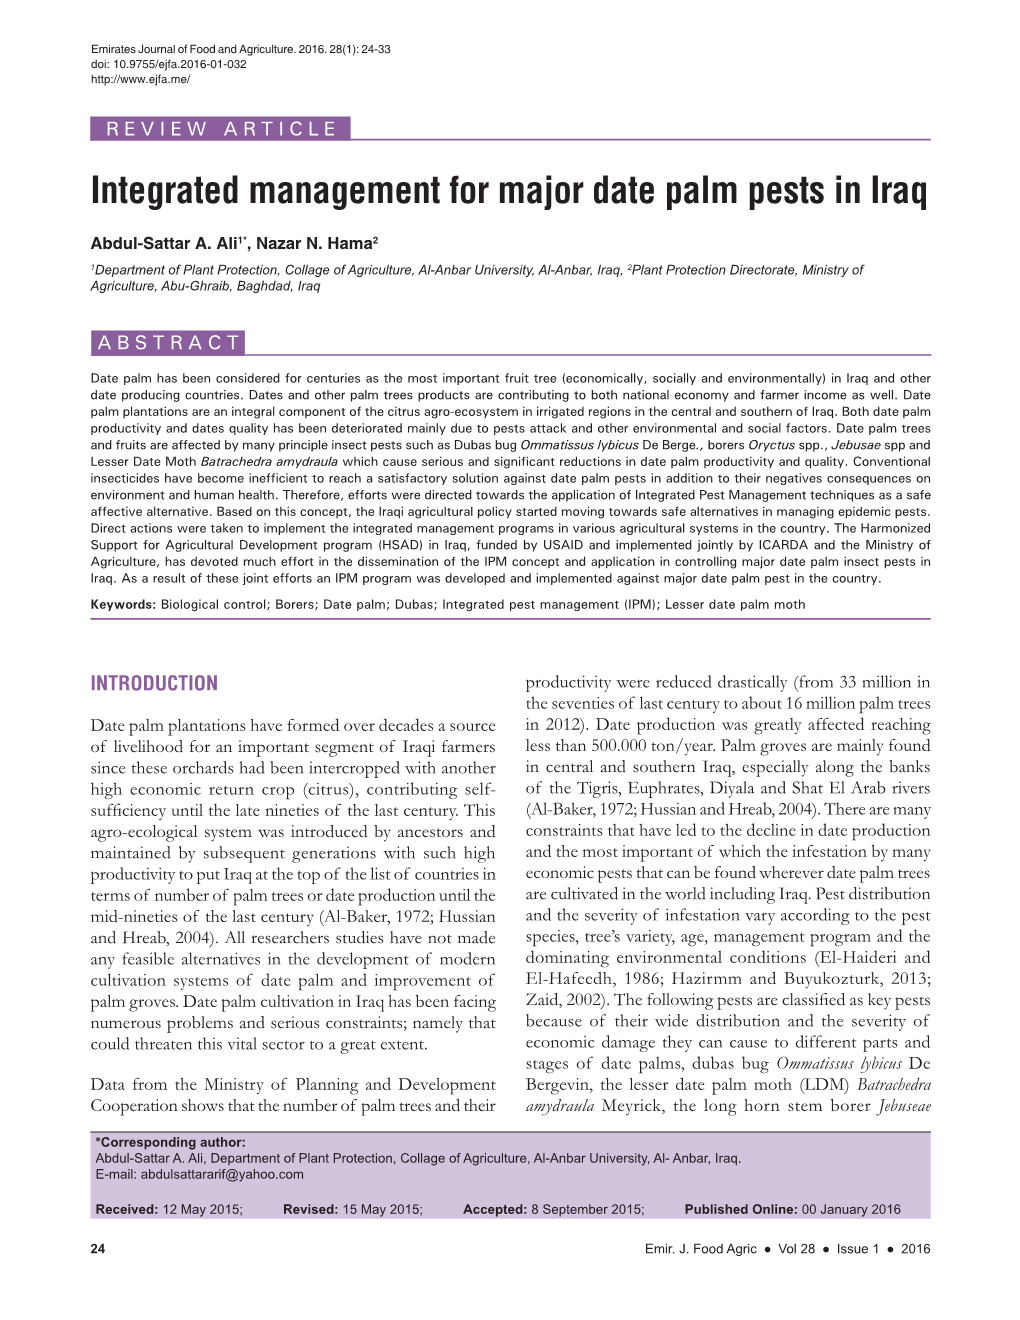 Integrated Management for Major Date Palm Pests in Iraq